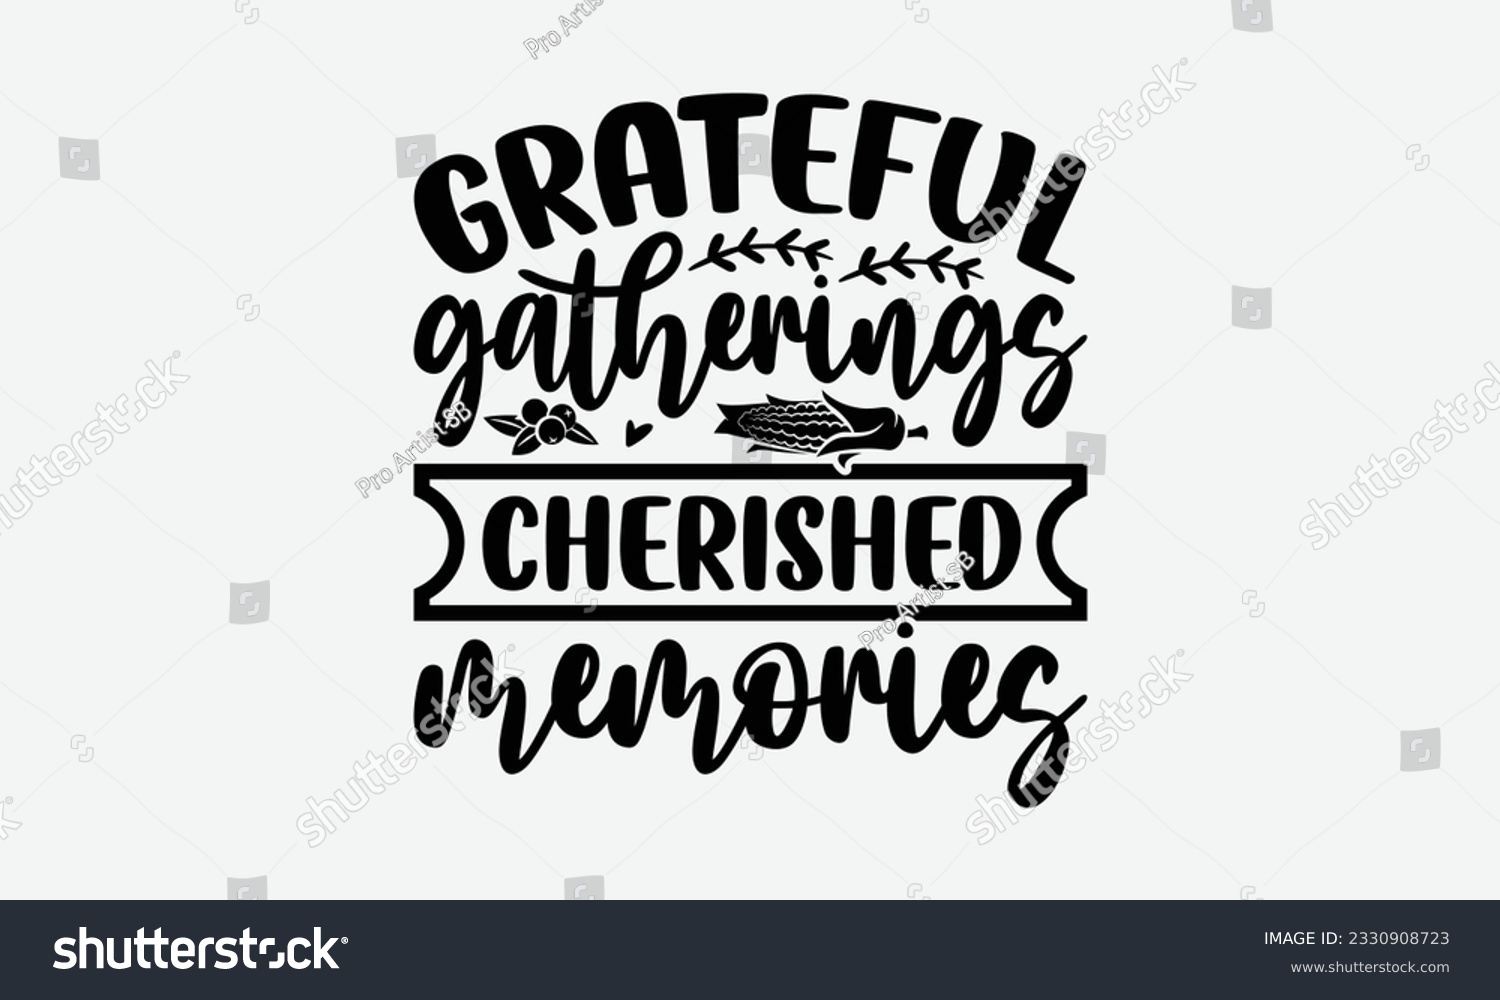 SVG of Grateful Gatherings Cherished Memories - Thanksgiving T-shirt Design Template, Happy Turkey Day SVG Quotes, And Hand Drawn Lettering Phrase Isolated On White Background. svg